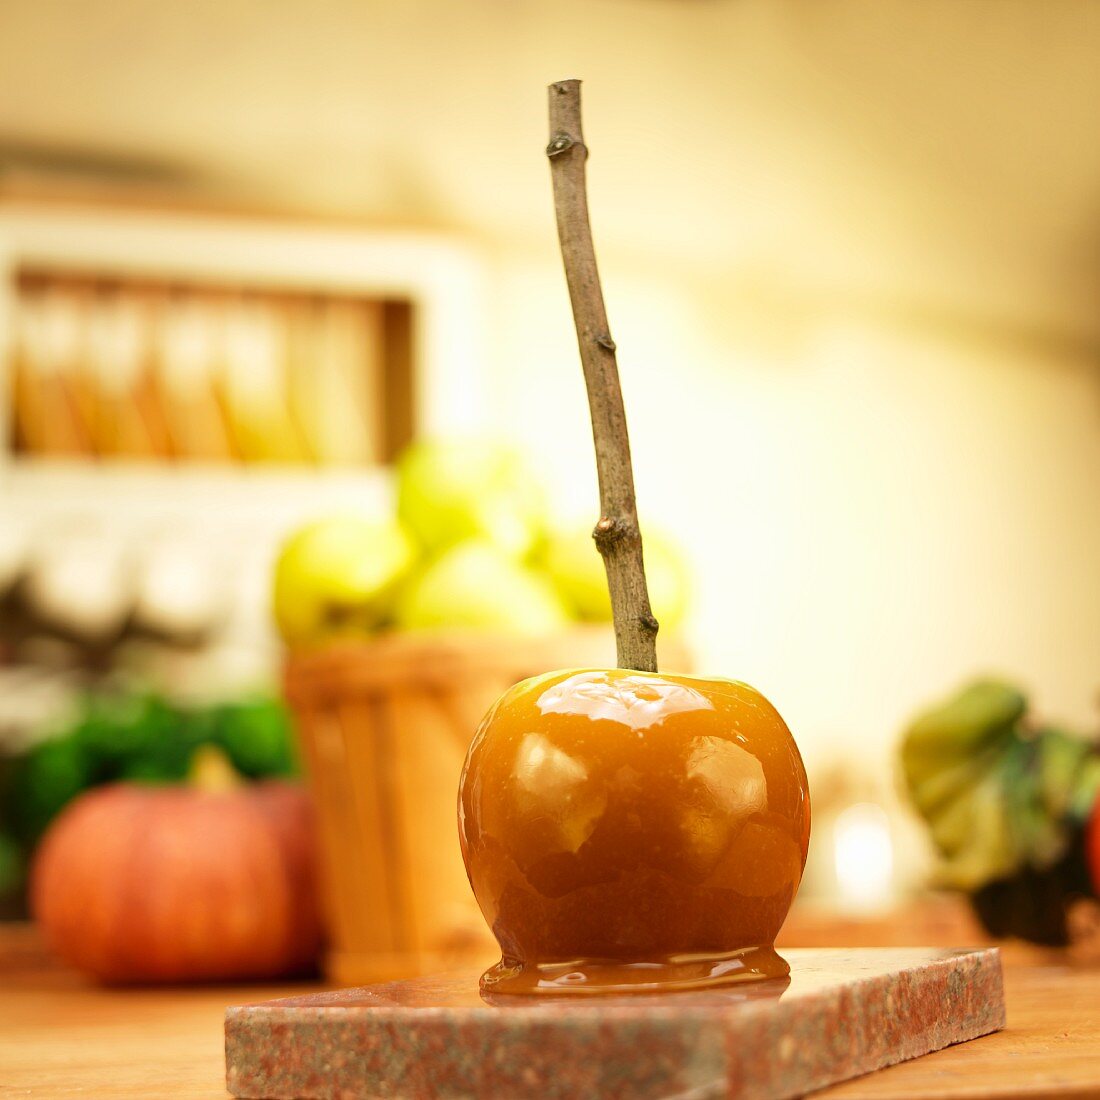 A caramel apple with a stick in front of apples and pumpkins in a kitchen